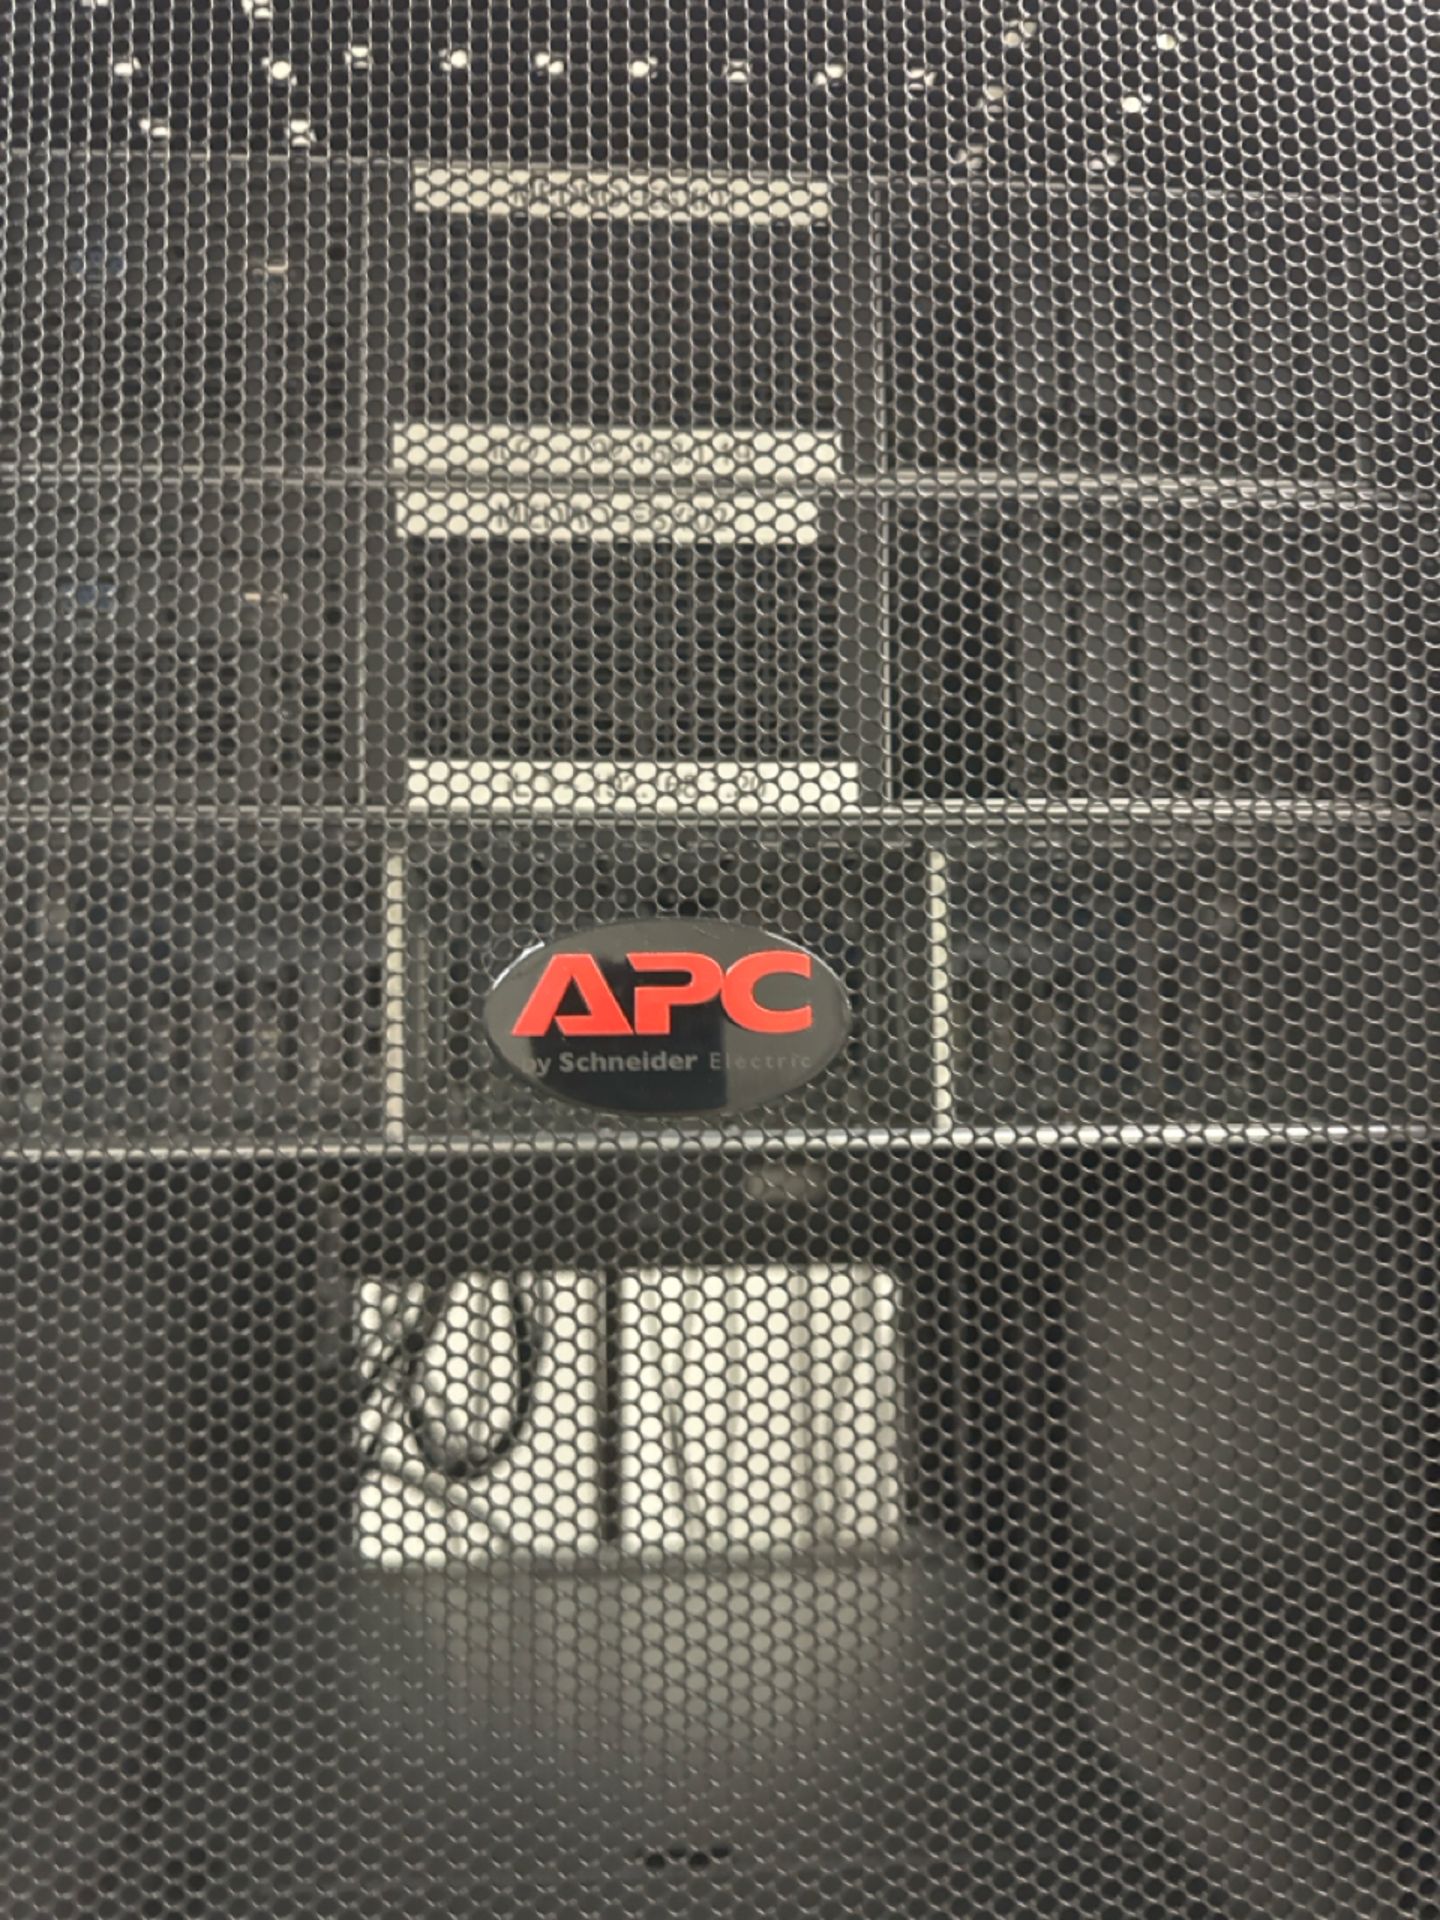 APC IT Tower Rack w/ Contents - Image 15 of 18